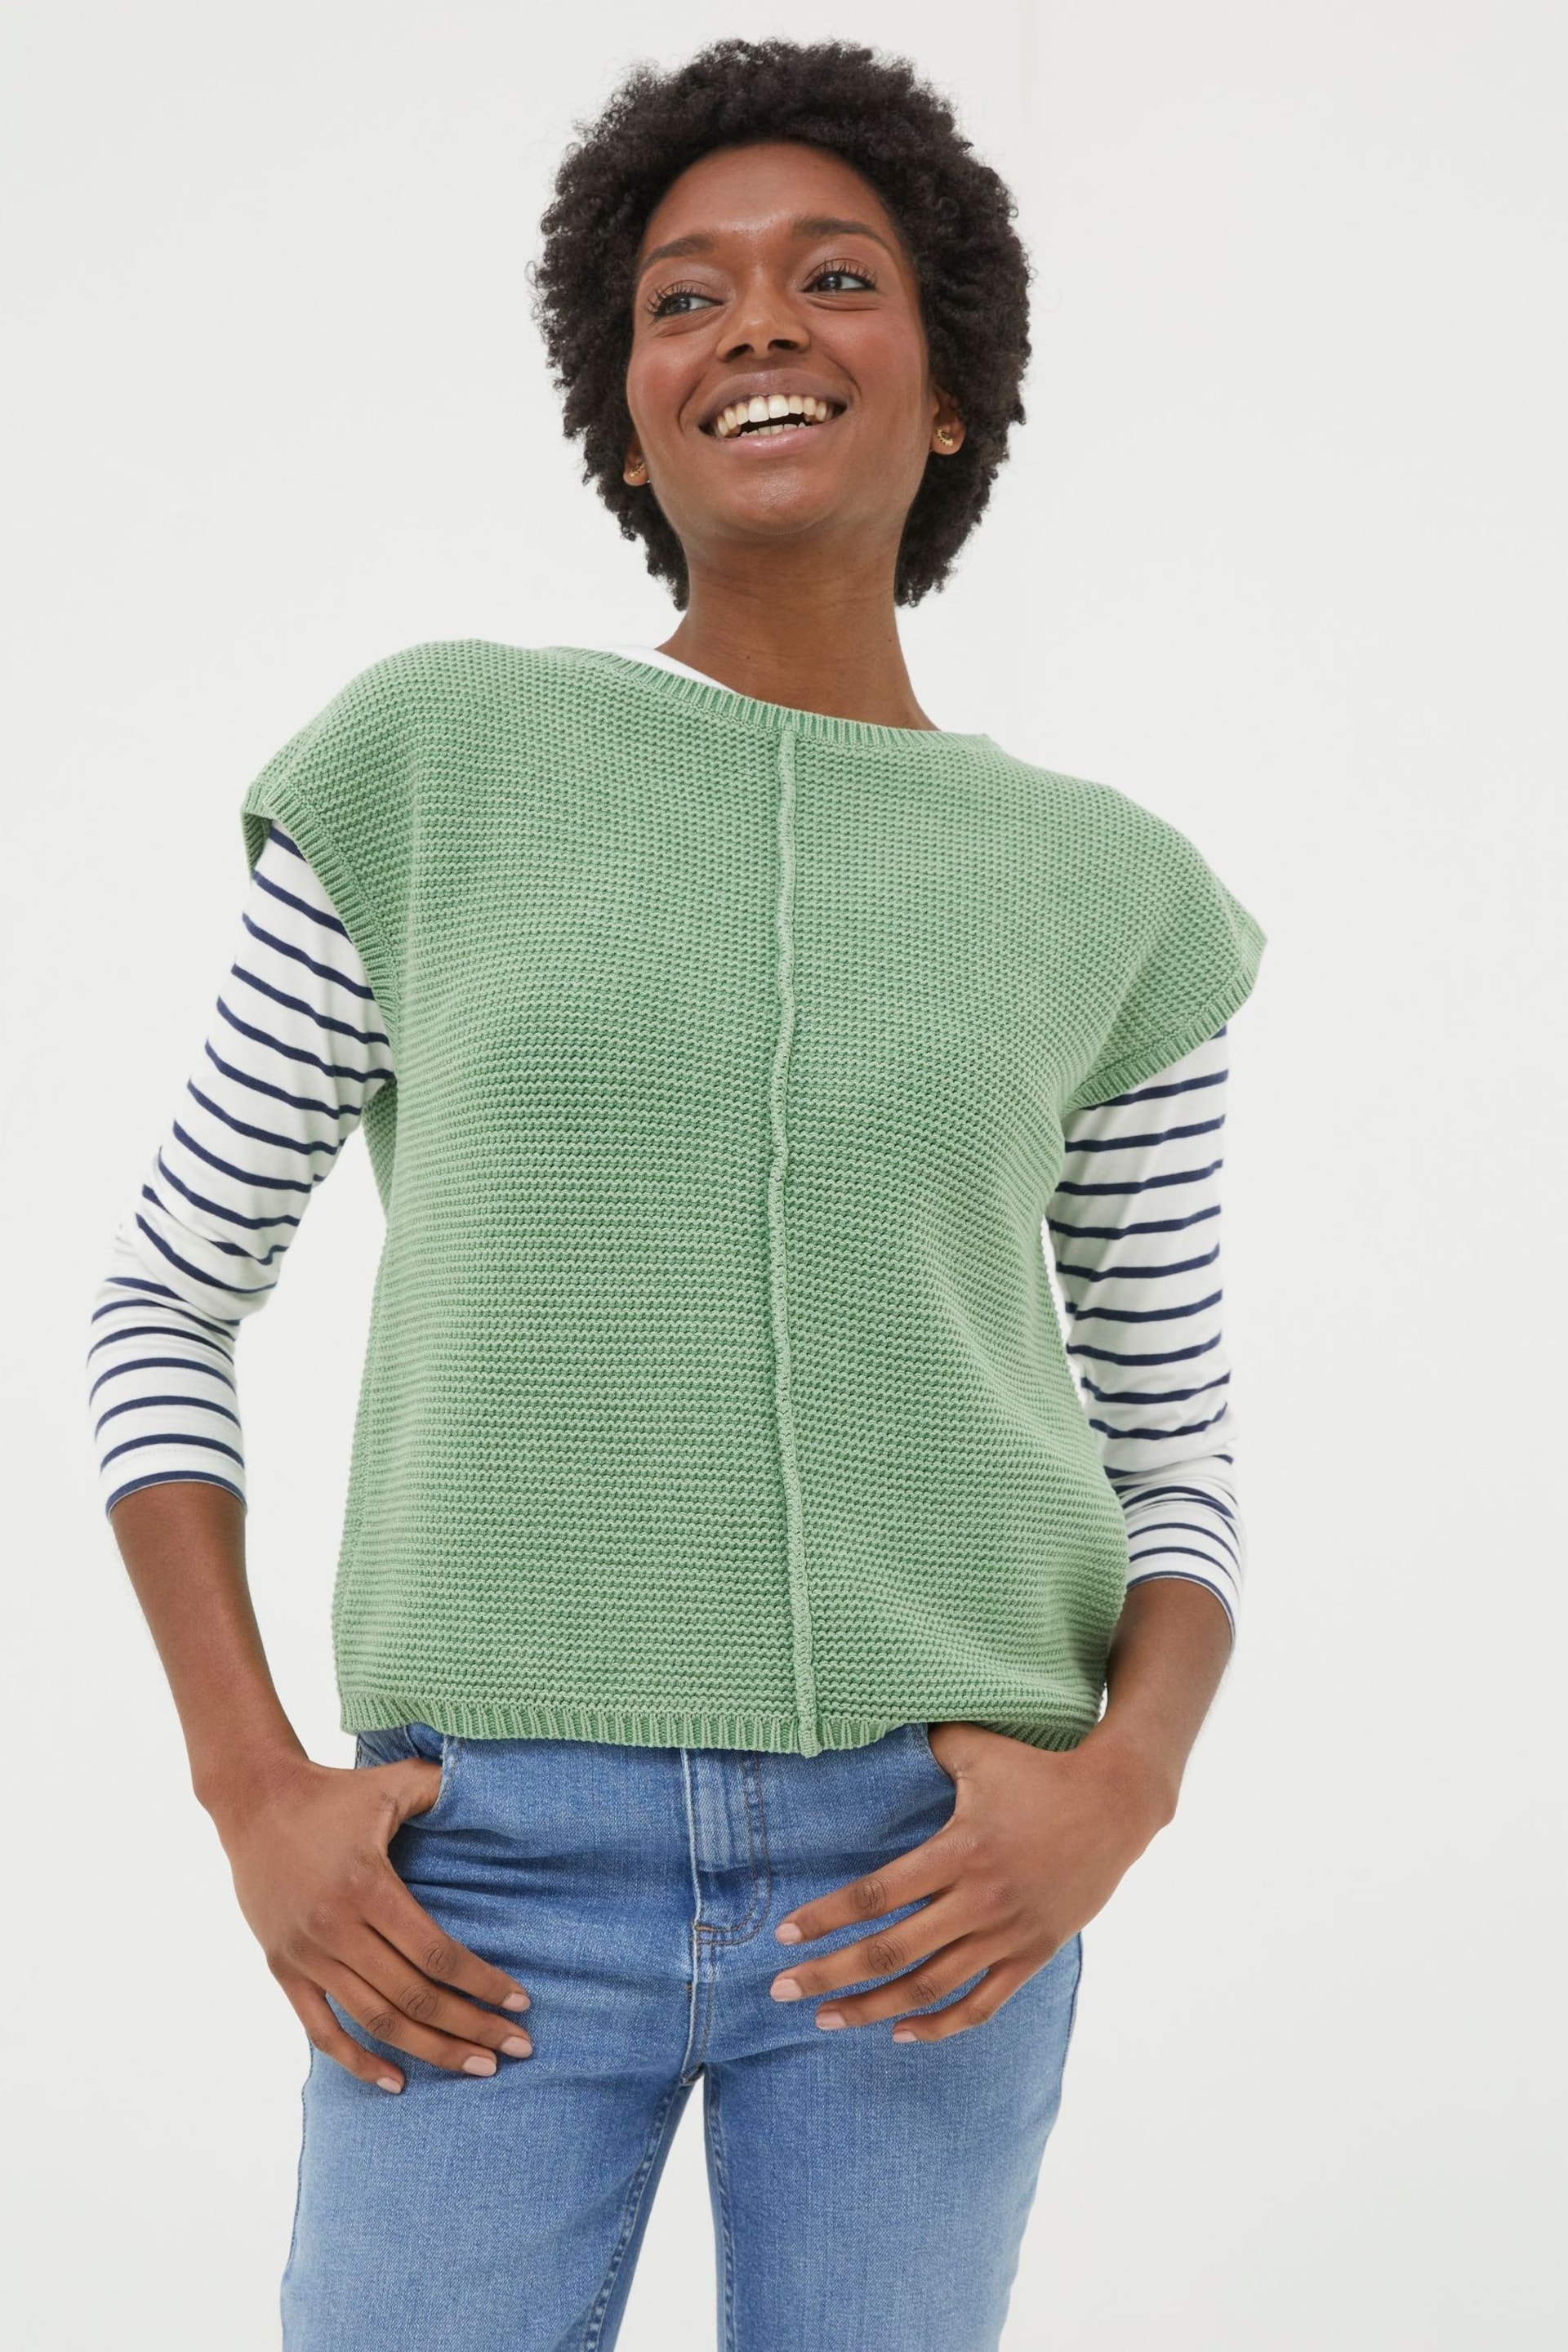 FatFace Green Knitted Crew Jumper - Image 1 of 4